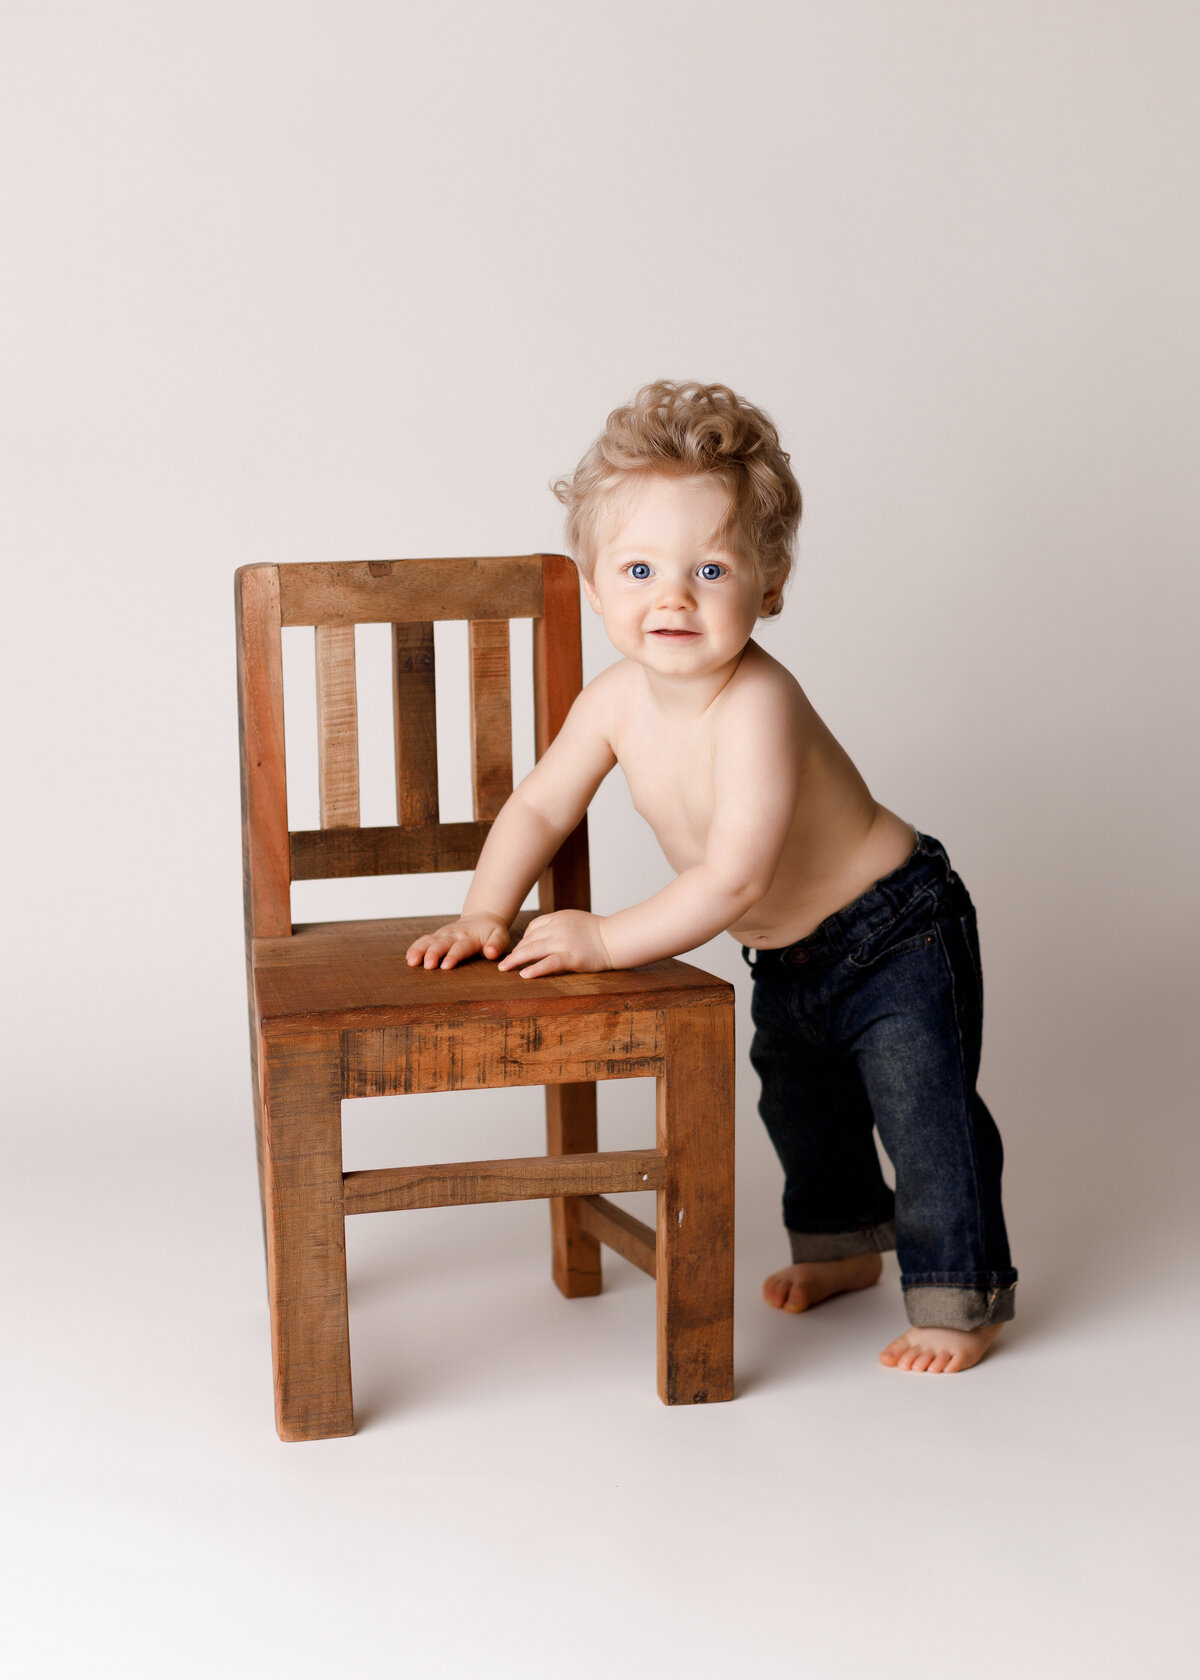 One-year milestone photoshoot in West Palm Beach, FL photo studio. Baby boy with curly blonde hair wearing jeans is standing up against a miniature chair.